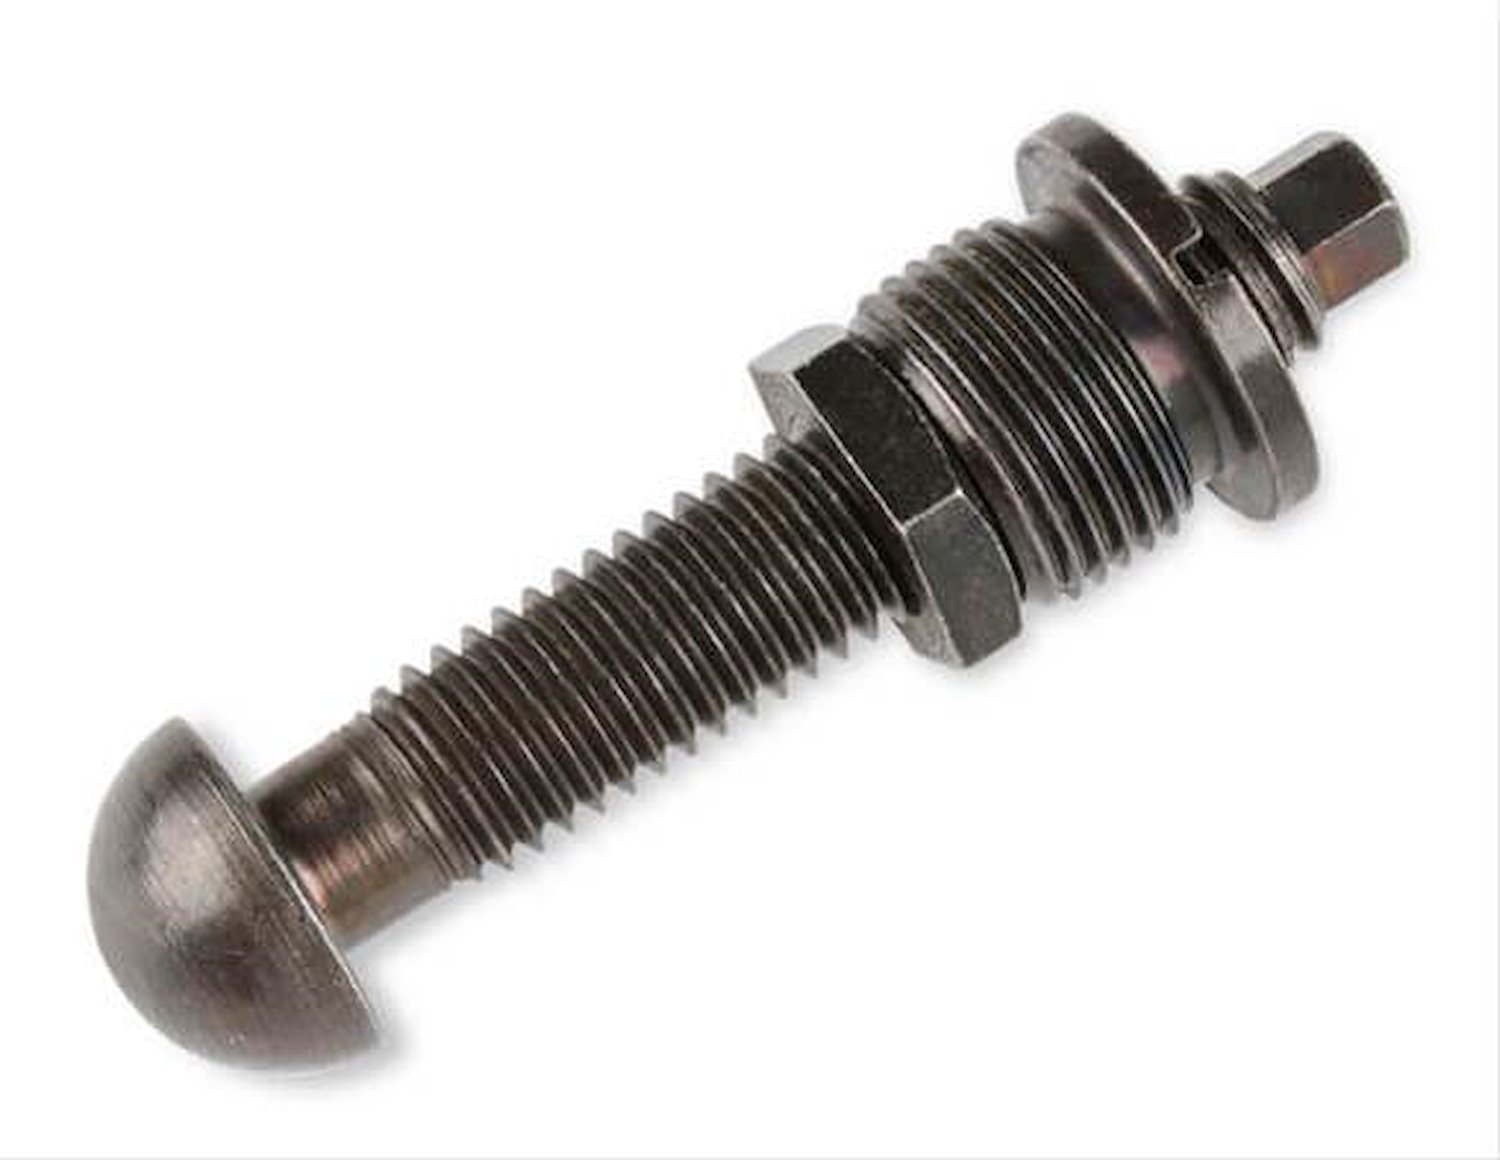 Clutch Adjustable Pivot Ball Stud for 1979-2004 Ford Mustang